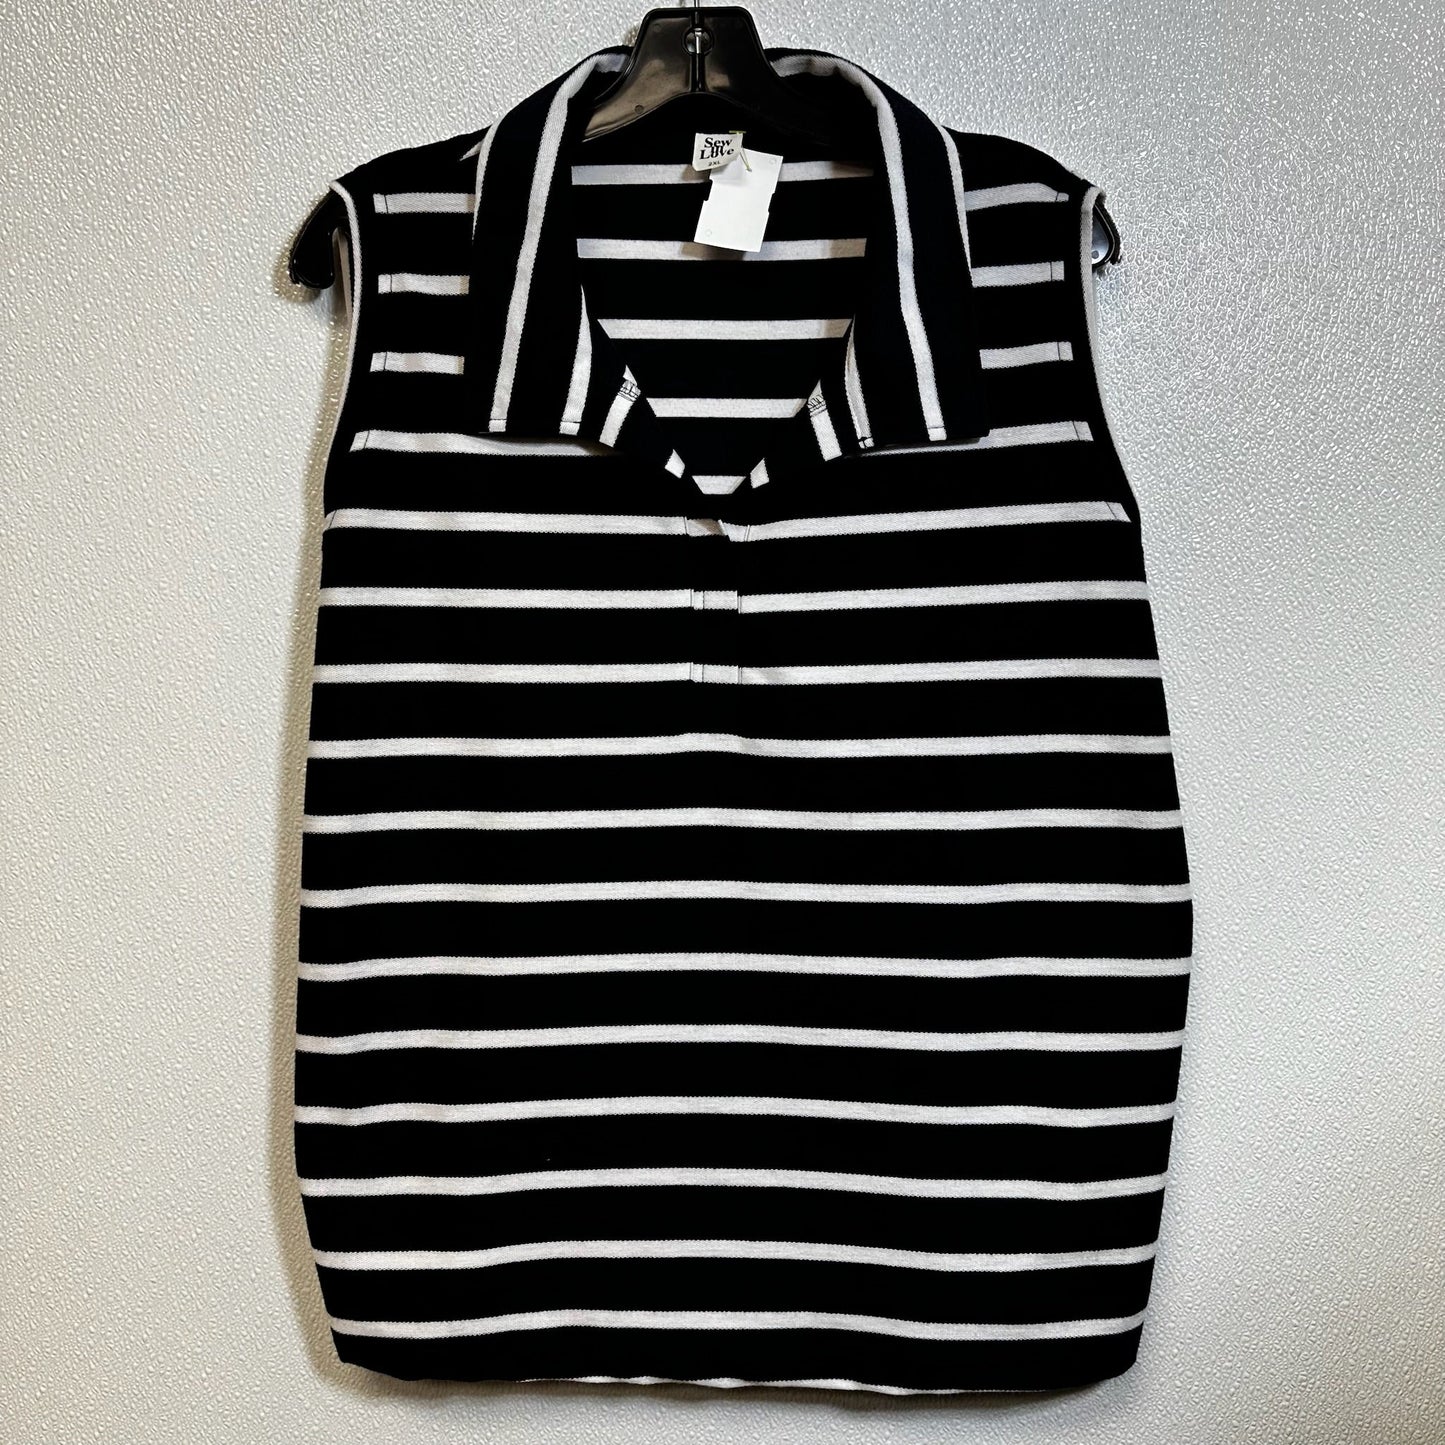 Striped Top Sleeveless Sew In Love, Size 2x